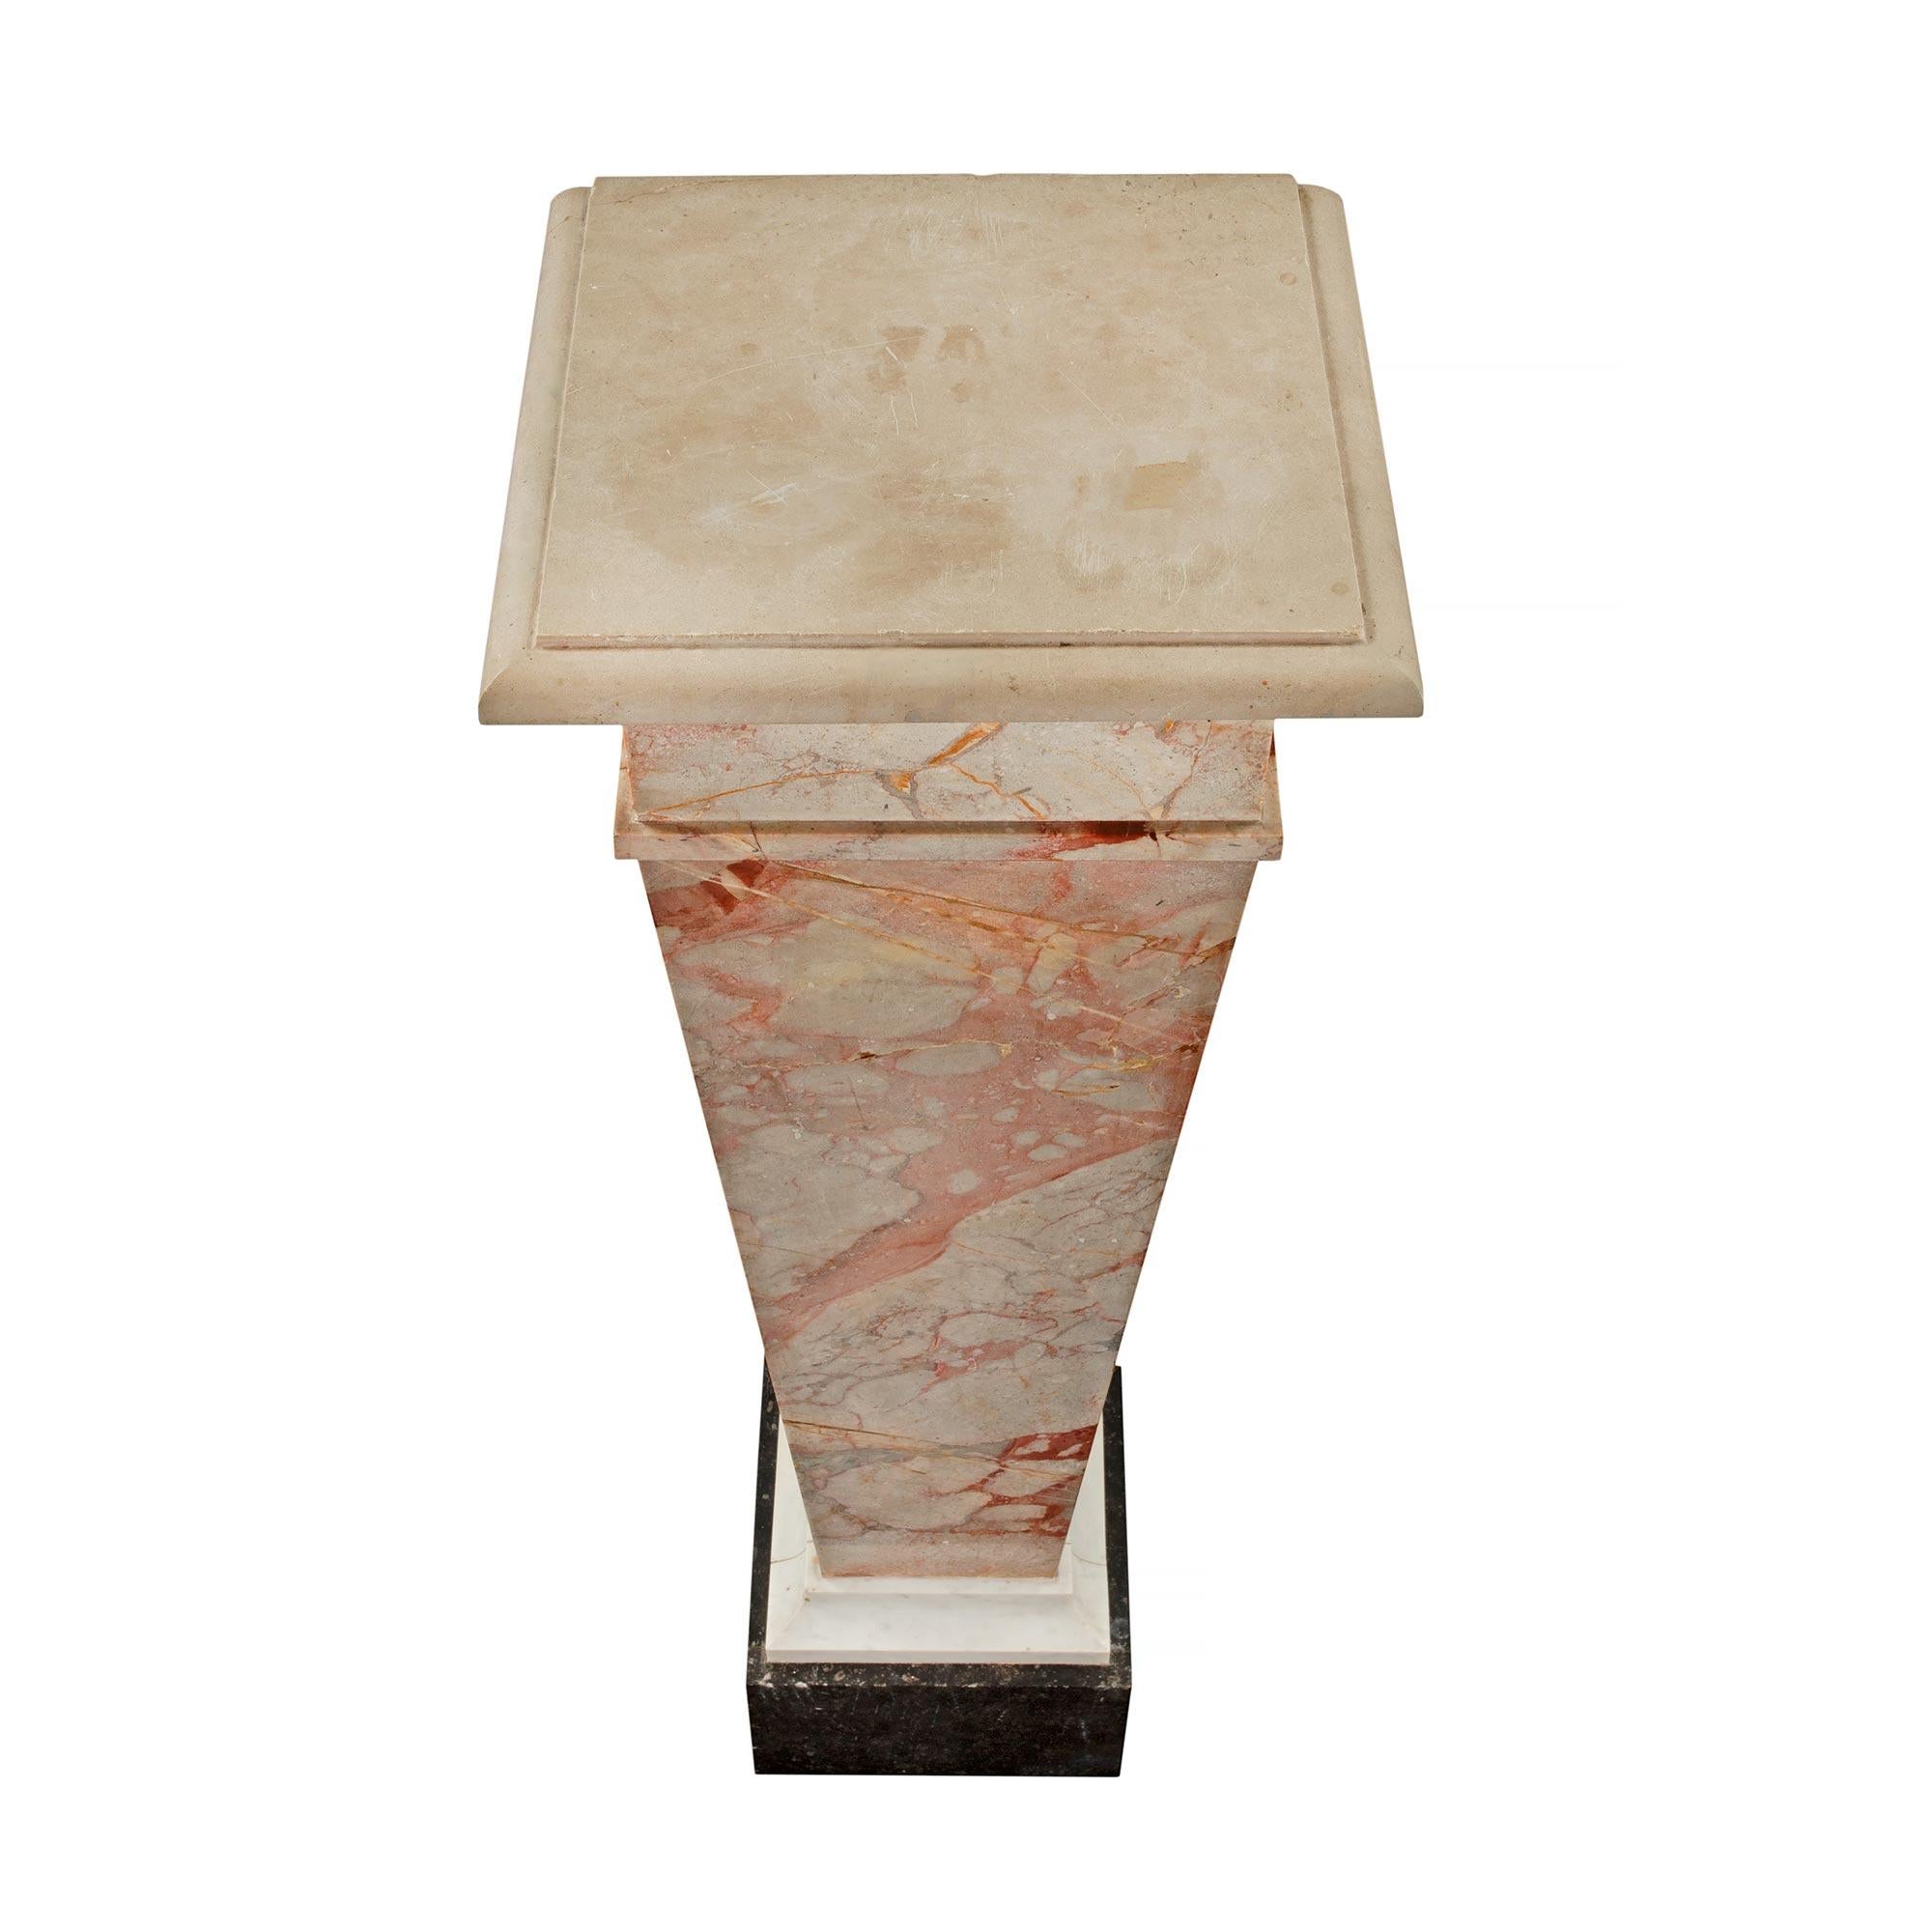 A handsome pair of Italian 19th century Louis XVI st. marble pedestals. The pair are raised by an impressive and thick Black Belgian marble plinth below a White Carrara marble socle. Above is the tapered fut in Giallo Antico marble. The top